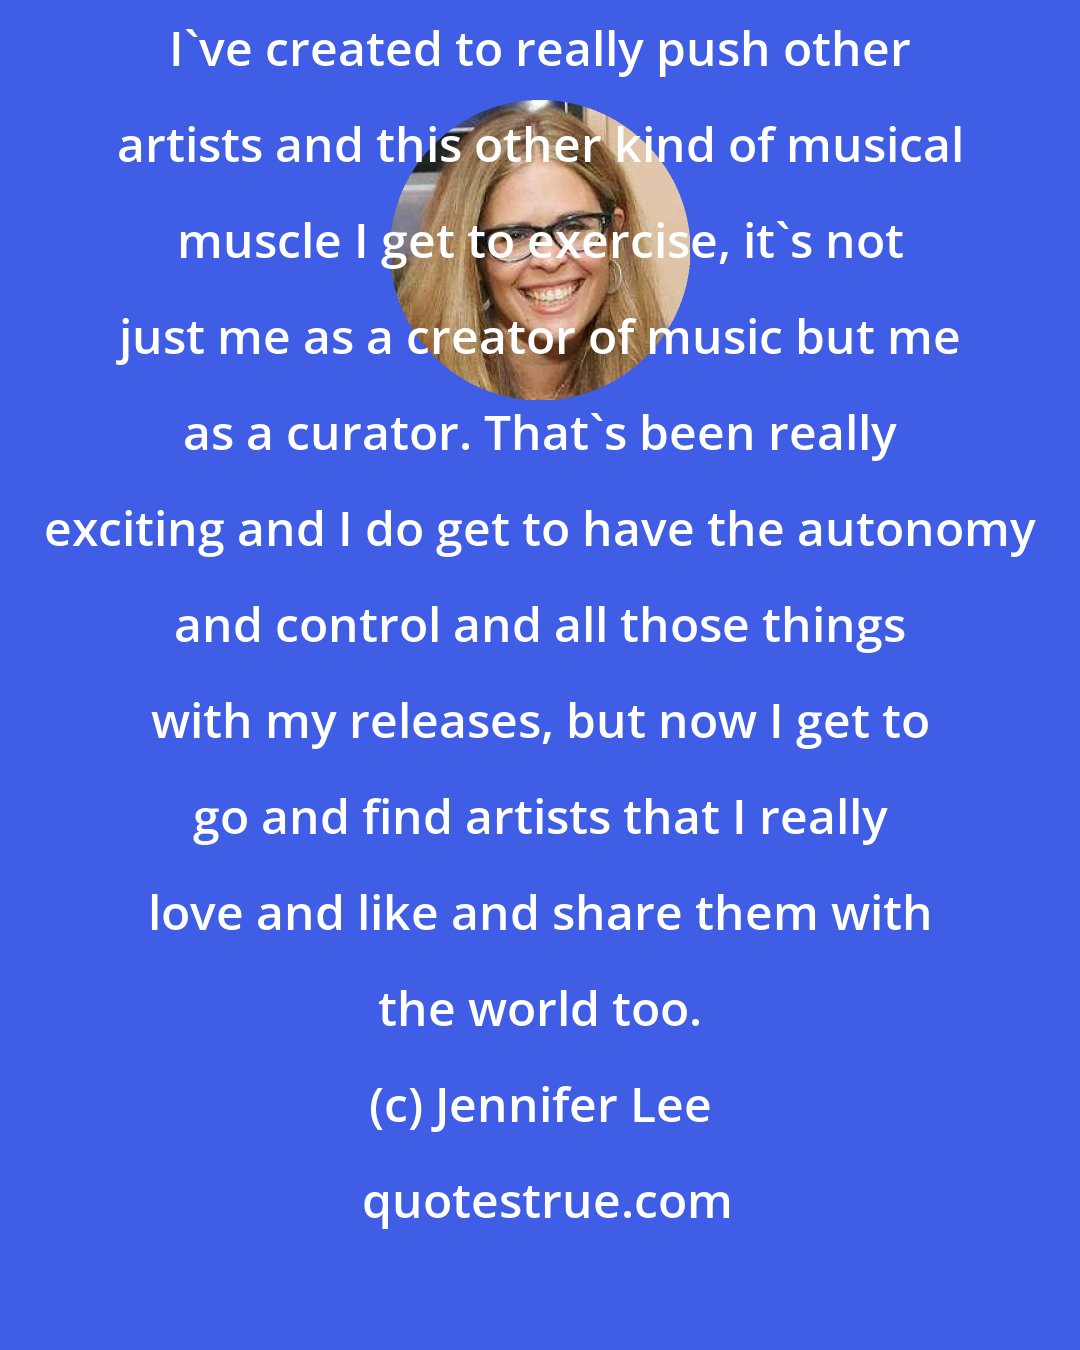 Jennifer Lee: The main joy I have in owning or being a part of my own label is the platform I've created to really push other artists and this other kind of musical muscle I get to exercise, it's not just me as a creator of music but me as a curator. That's been really exciting and I do get to have the autonomy and control and all those things with my releases, but now I get to go and find artists that I really love and like and share them with the world too.